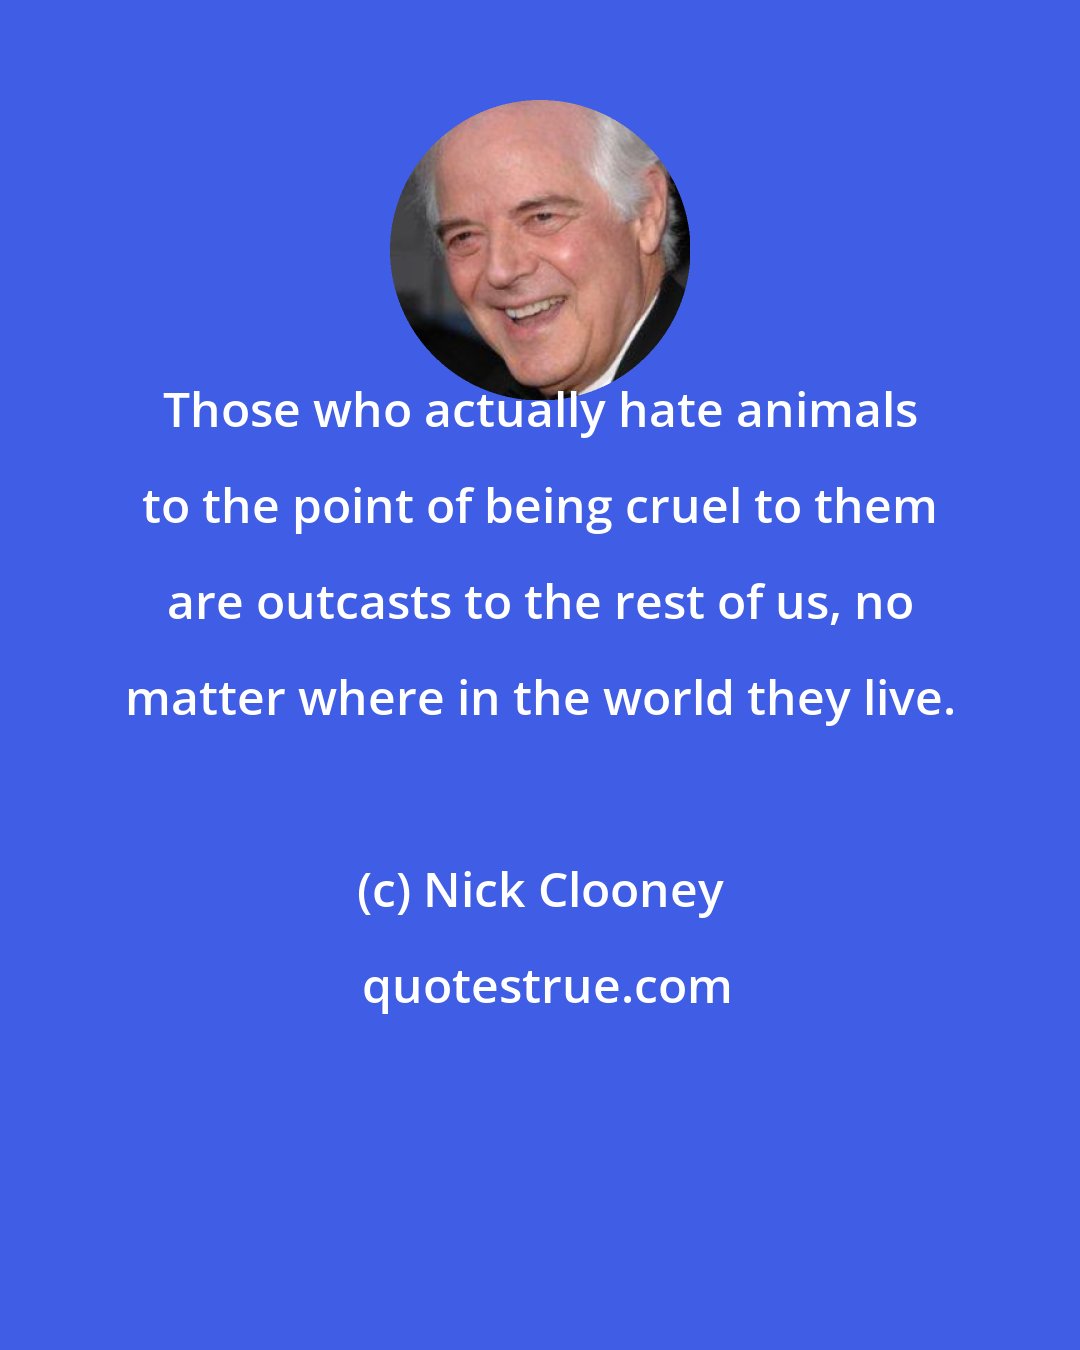 Nick Clooney: Those who actually hate animals to the point of being cruel to them are outcasts to the rest of us, no matter where in the world they live.